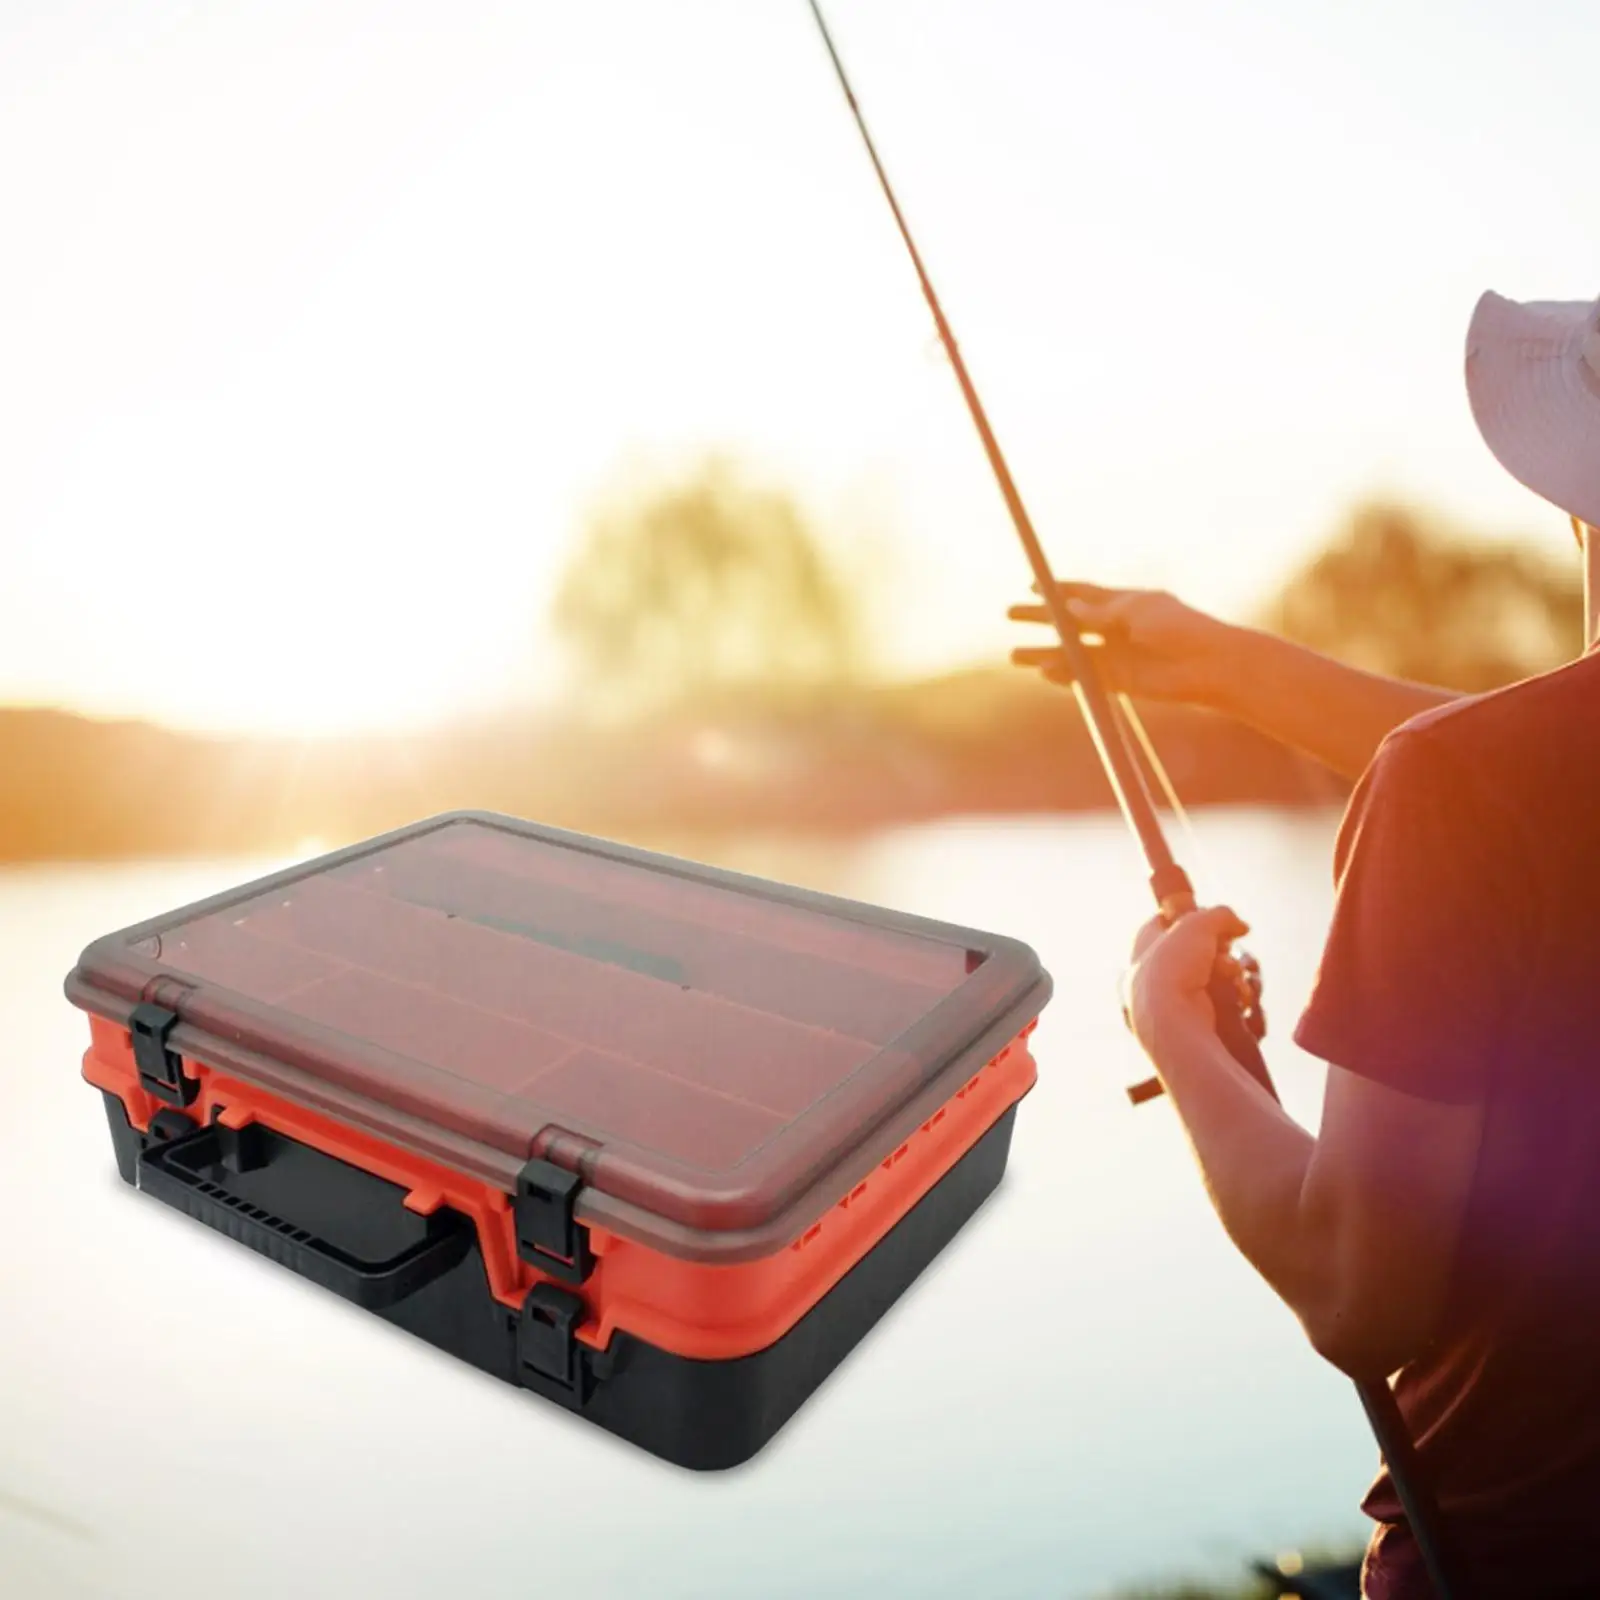 Multifunction Fishing Tackle Box 2 Layer with Adjustable Dividers Organizer for Beads Fishing Reel Fresh Water Spinners Hooks